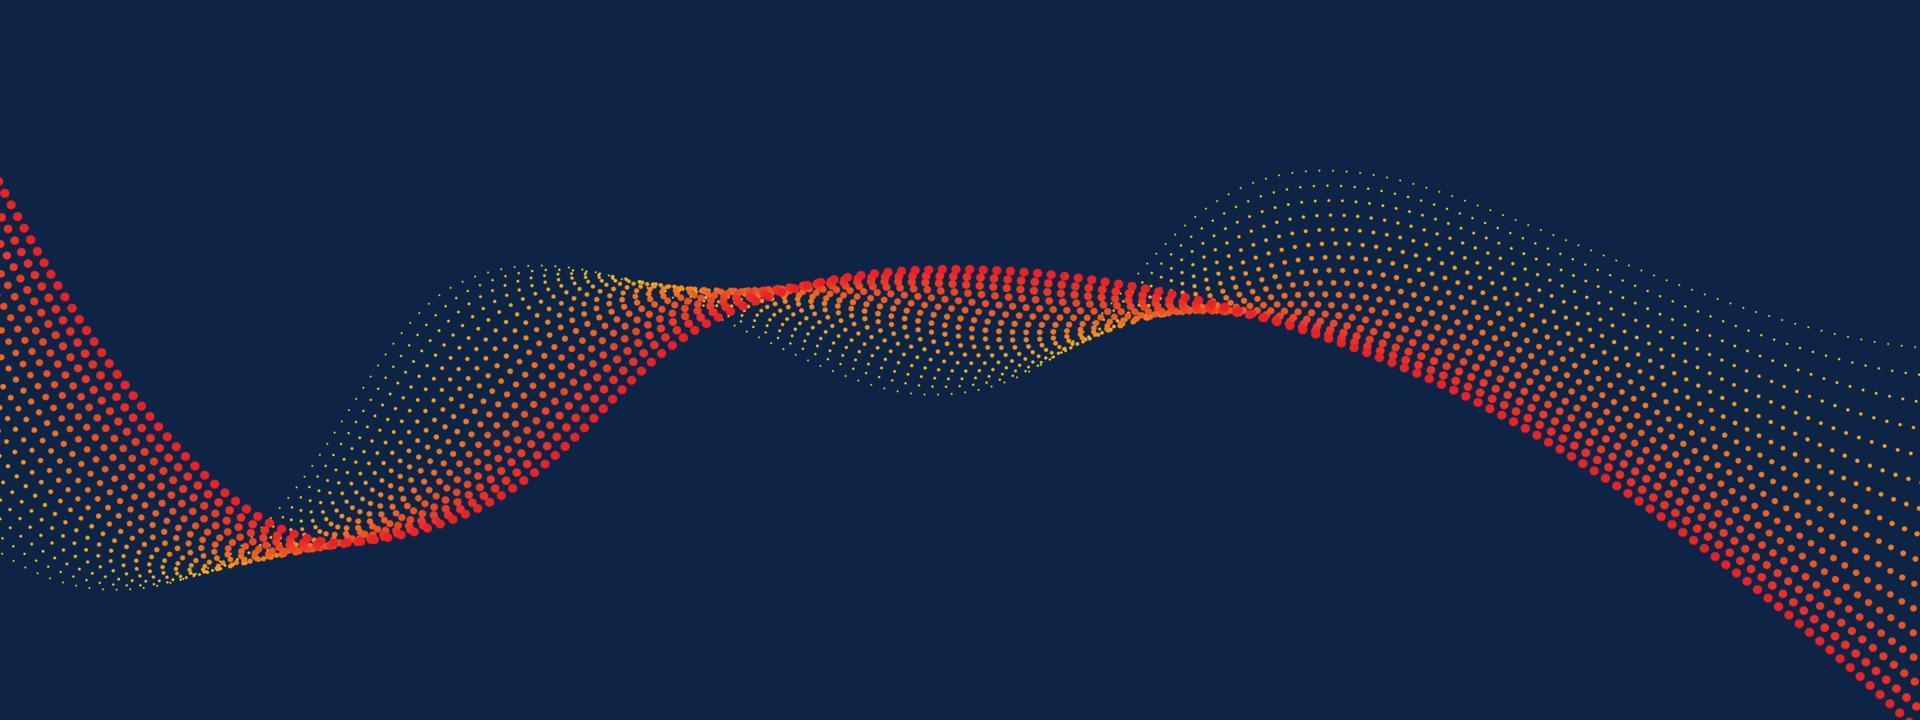 Abstract digital wave of particles flow vector